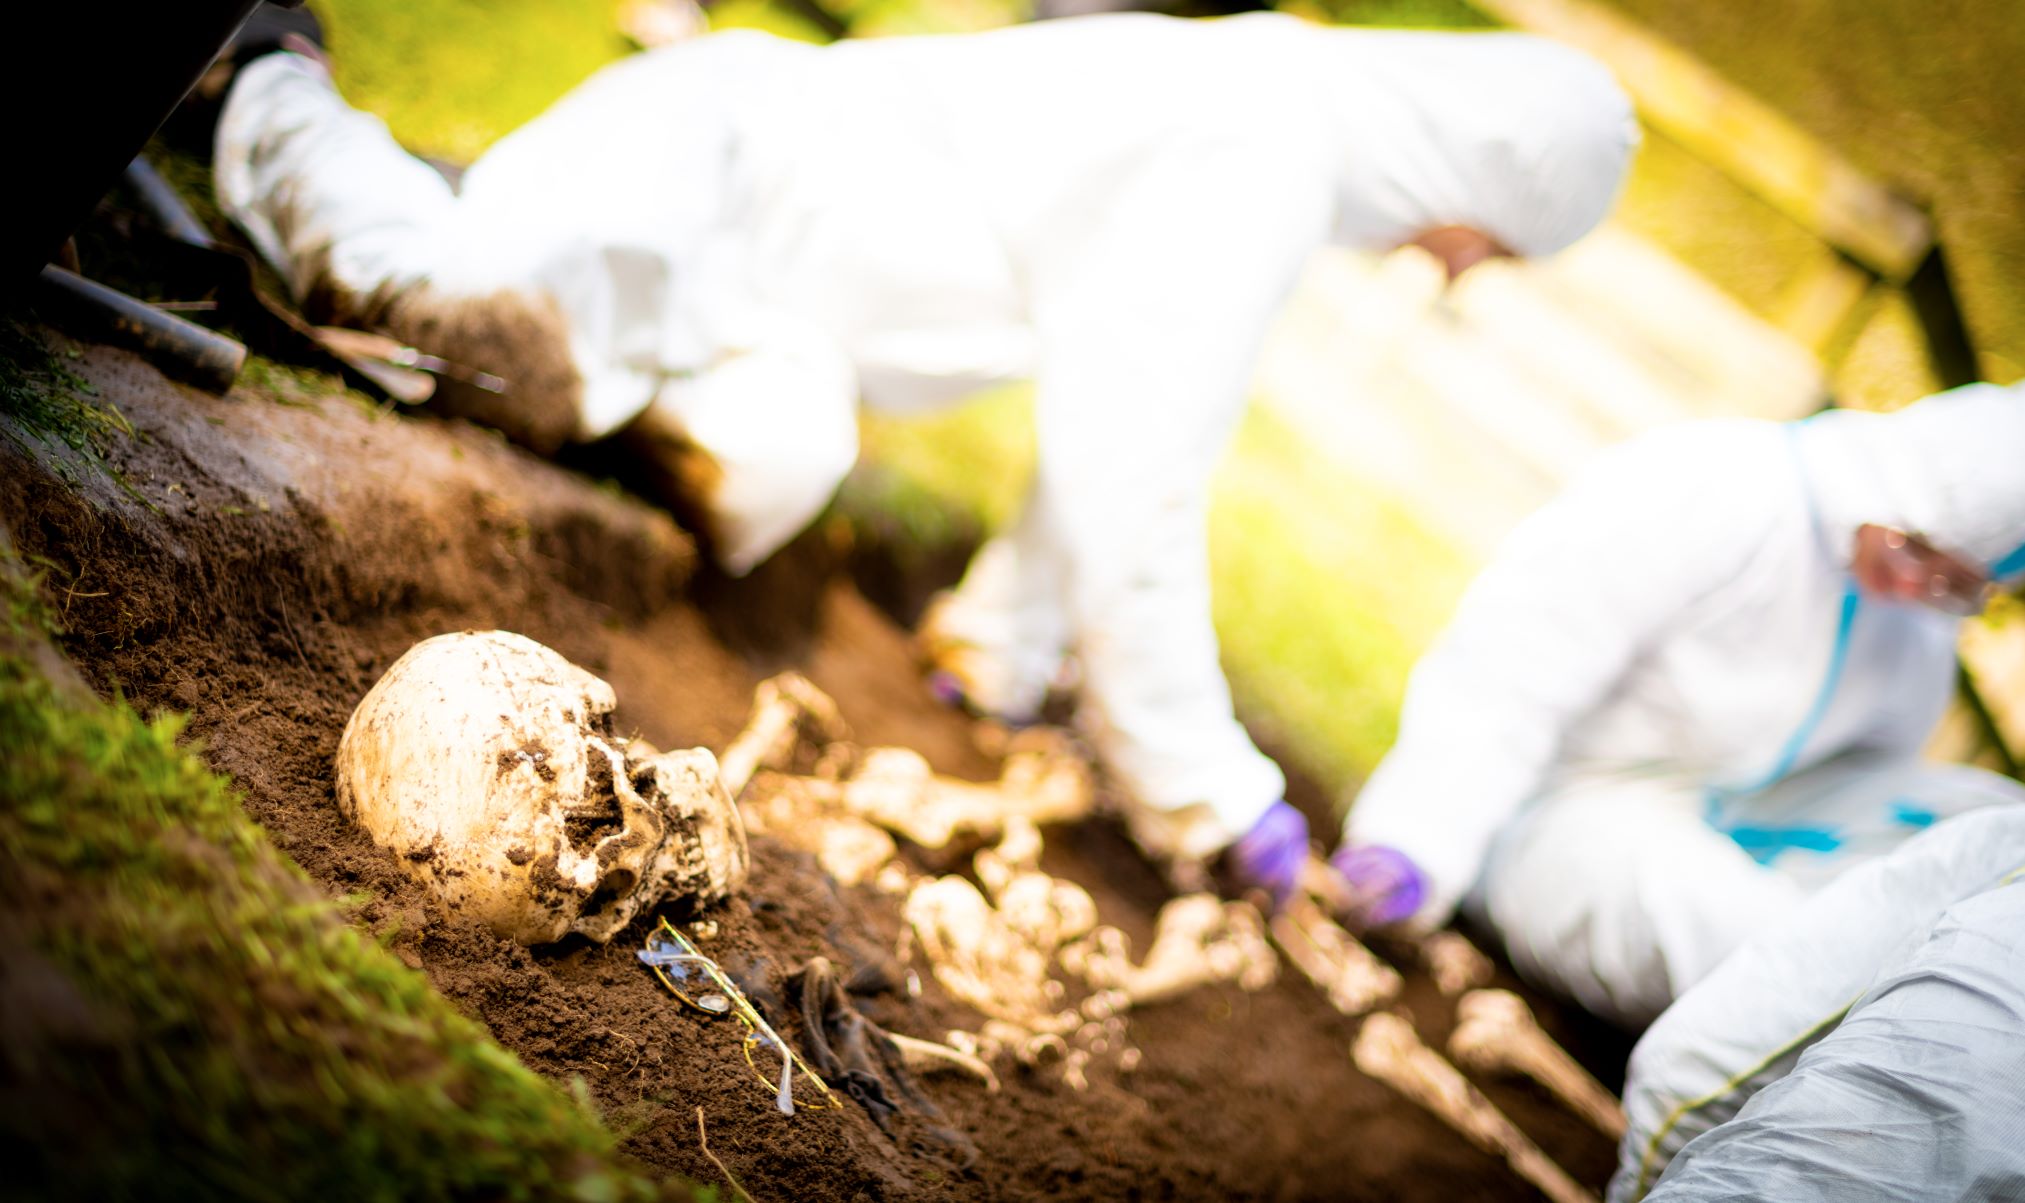 Angled photo of three people in white PPE excavating a simulated mass grave. In the foreground, in a shallow trench, are casts of some skeletonised human remains next to a pair of glasses and fabric scraps.